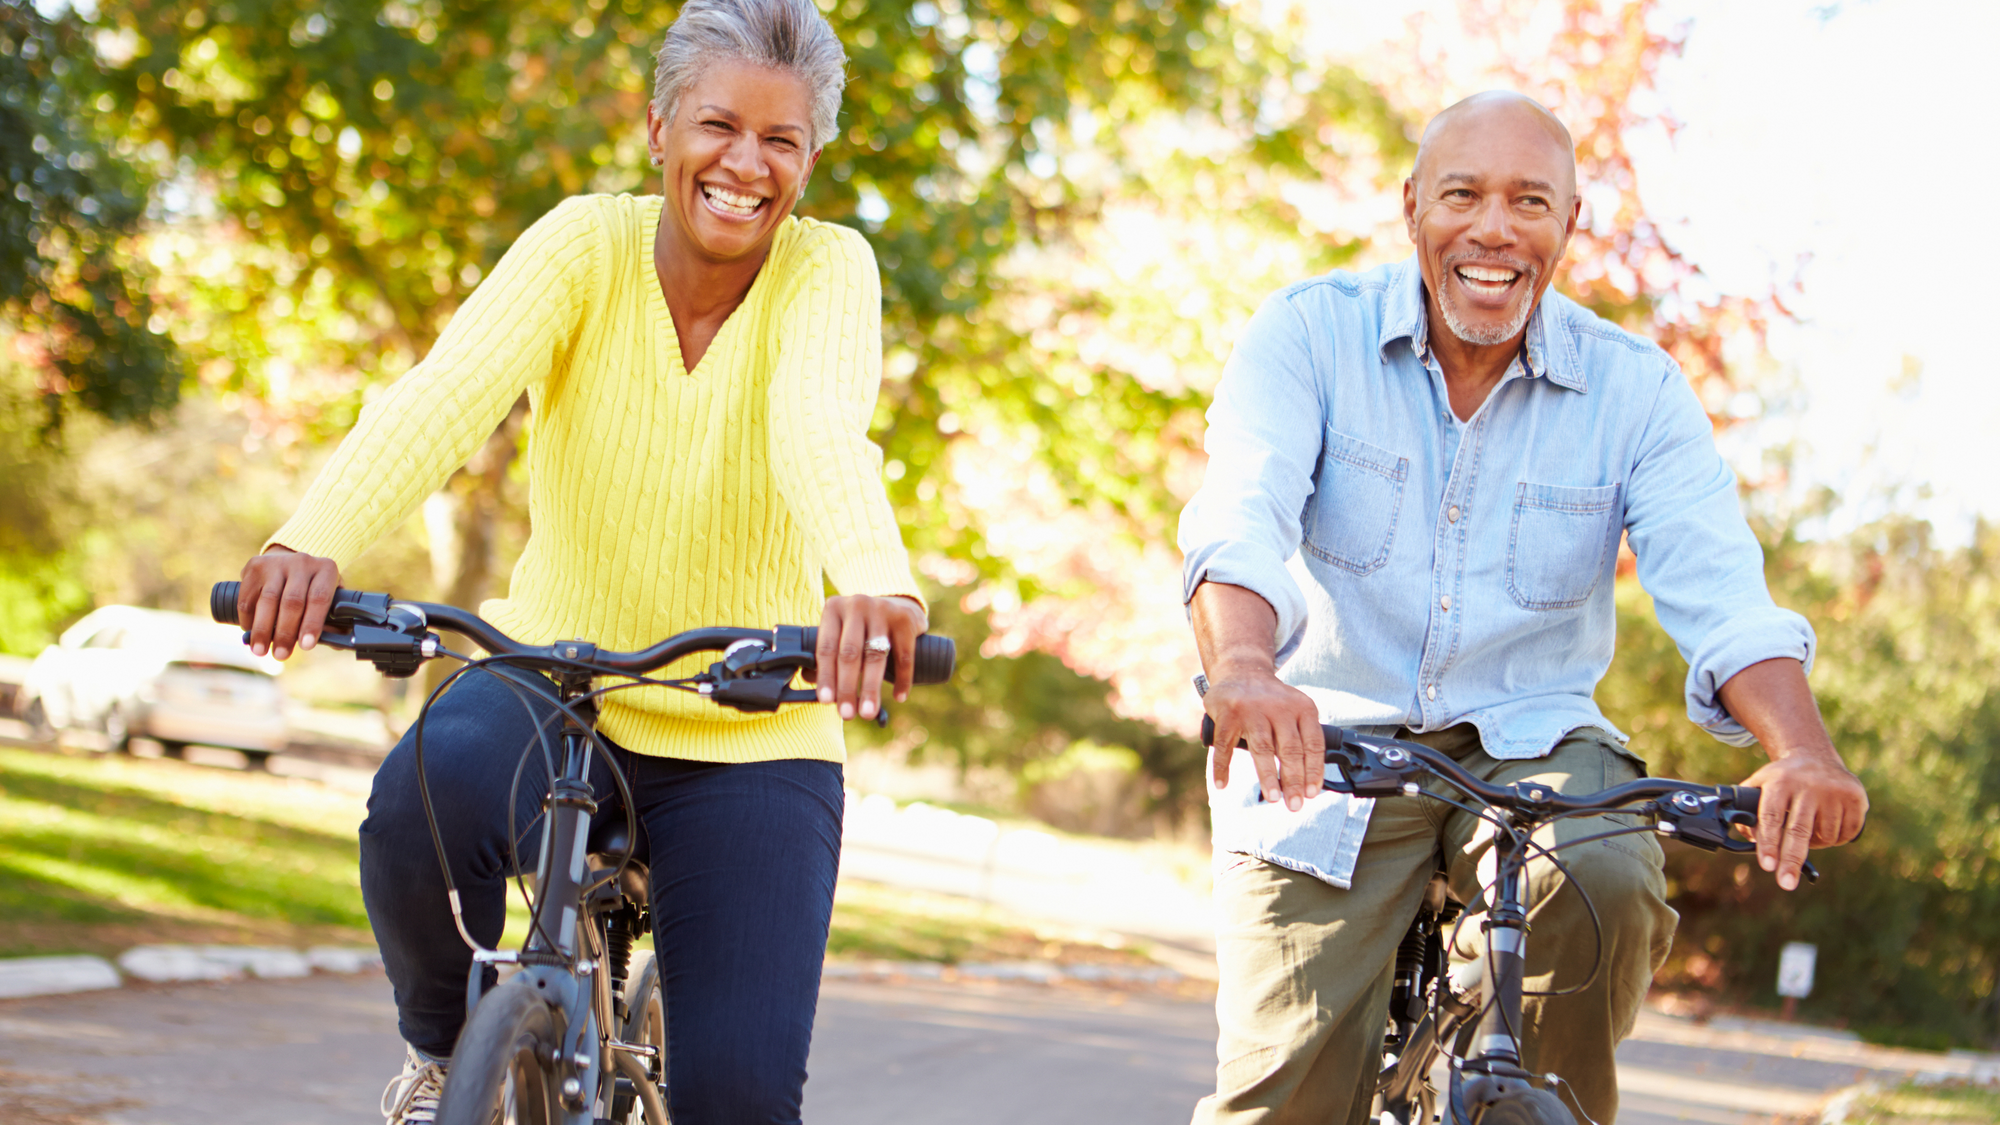 What motivates healthy aging?